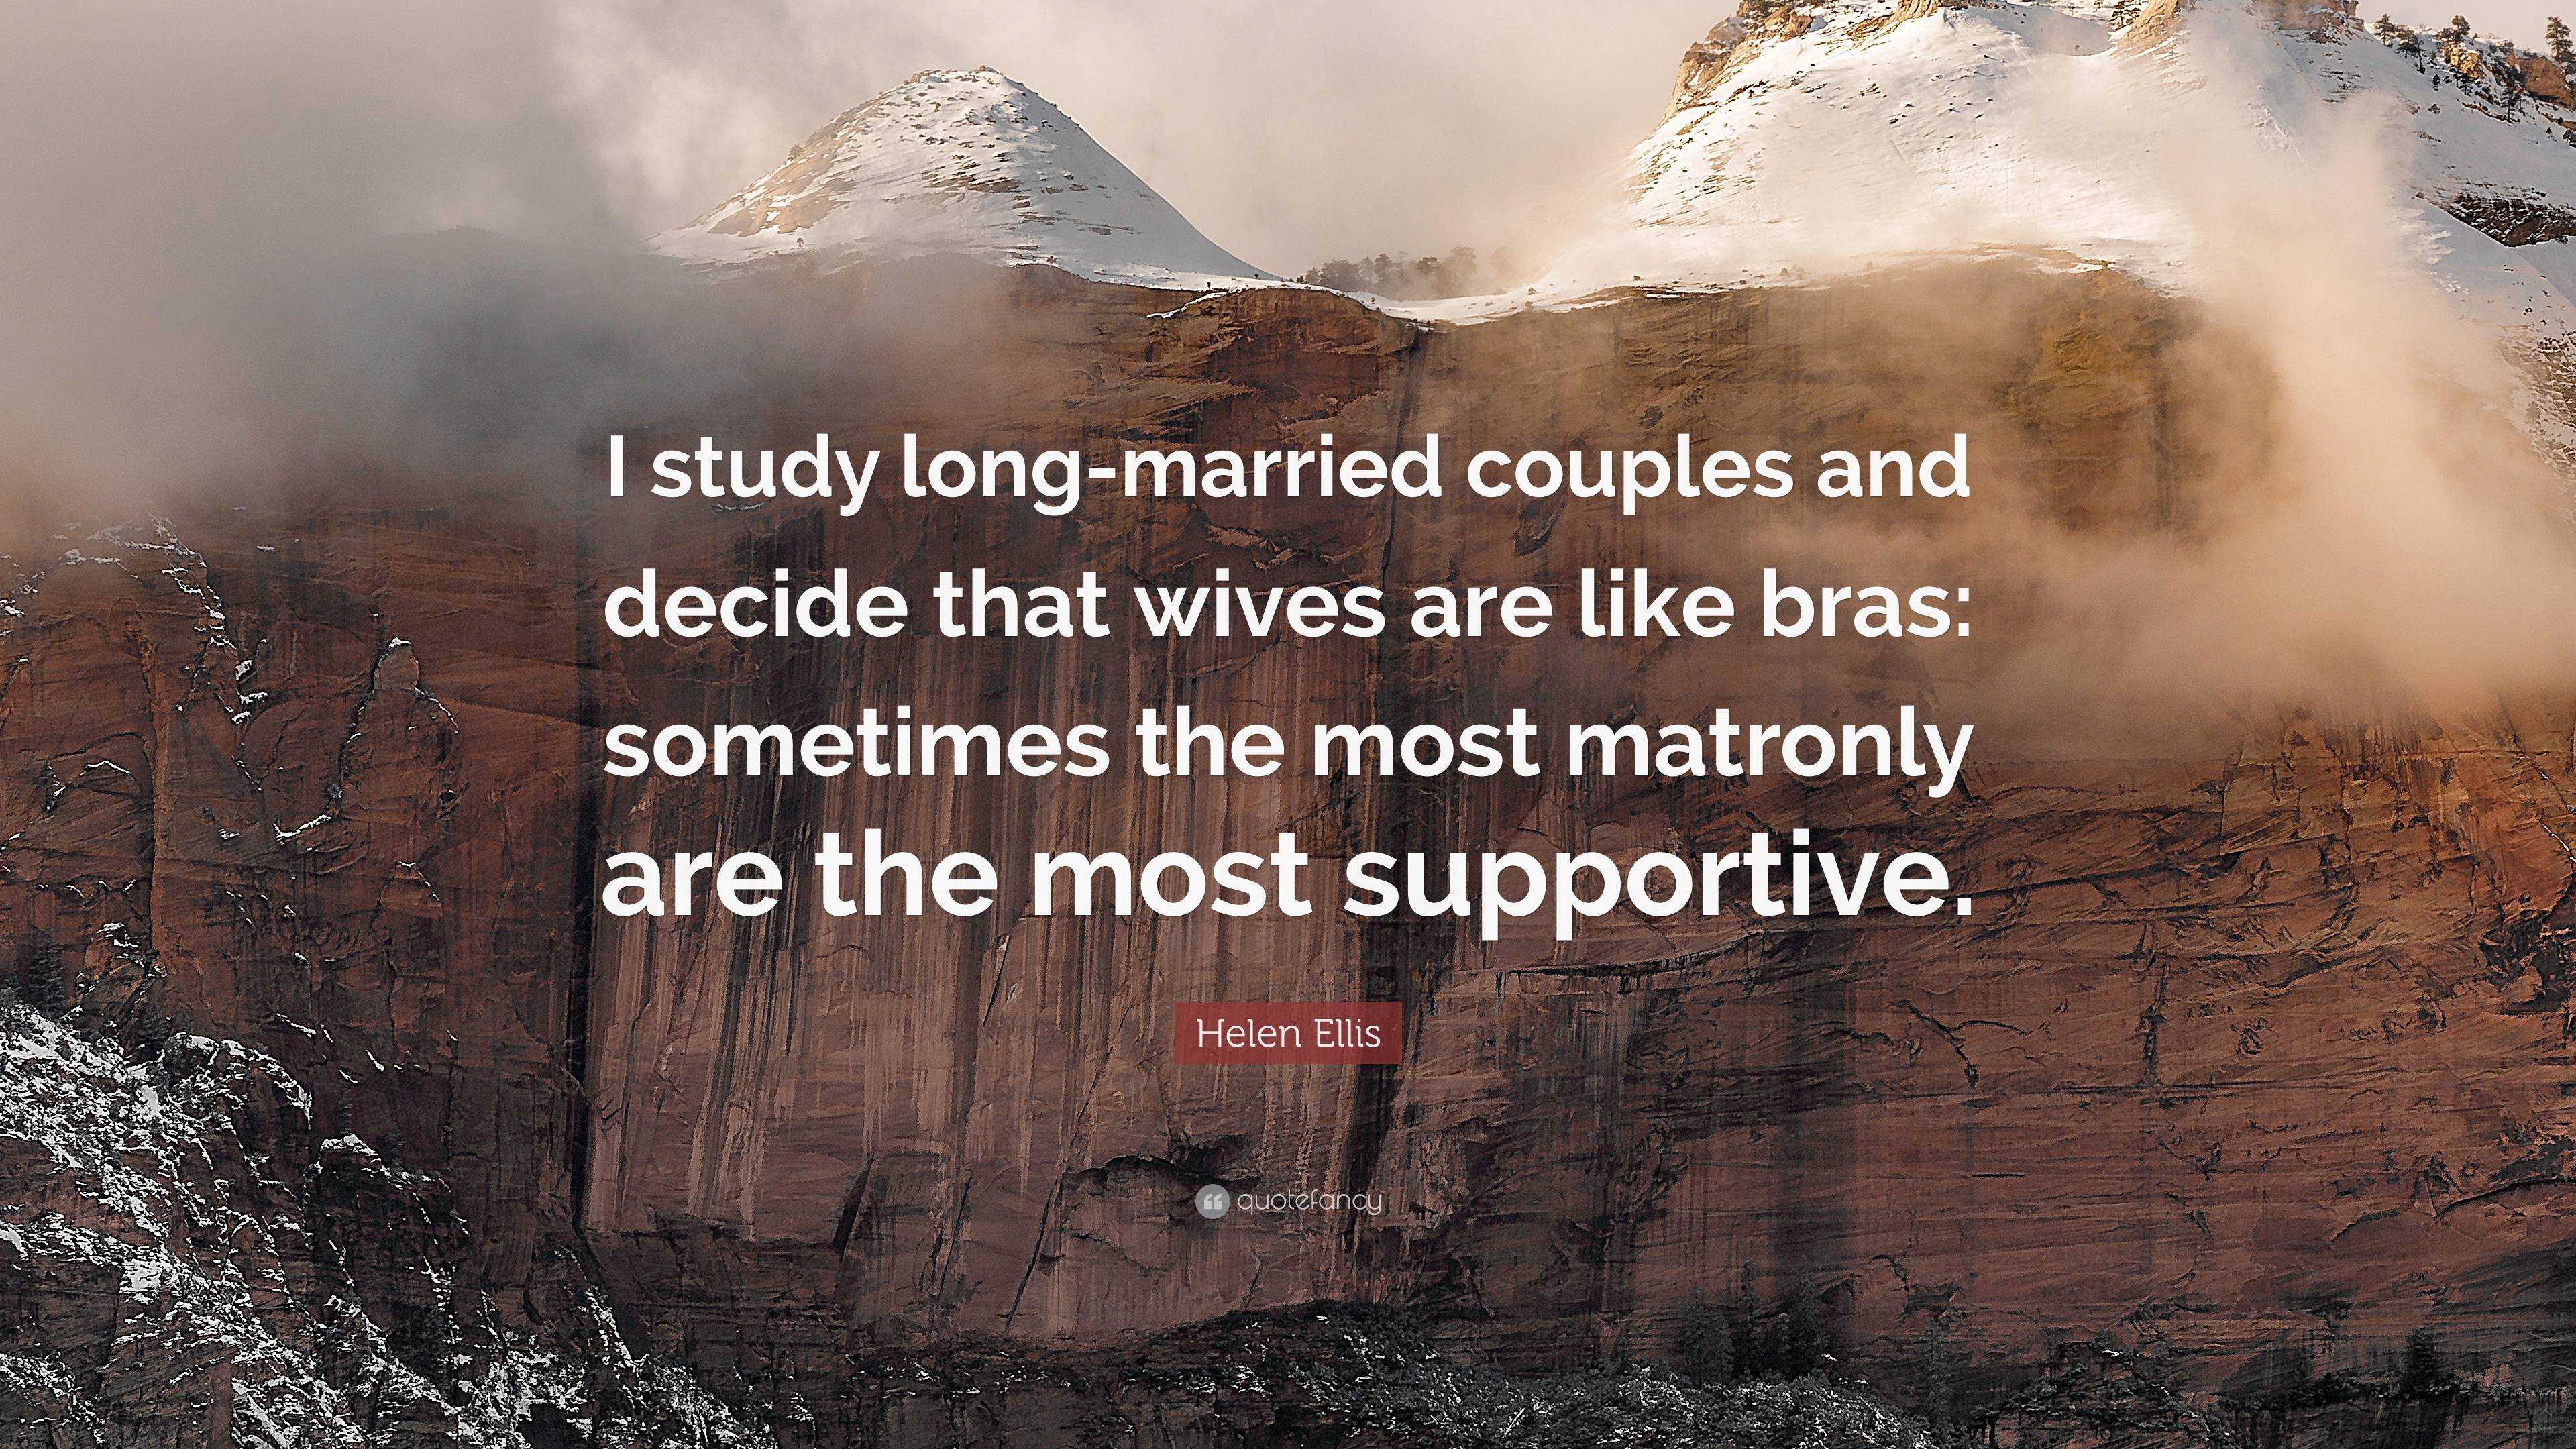 Helen Ellis Quote: “I study long-married couples and decide that